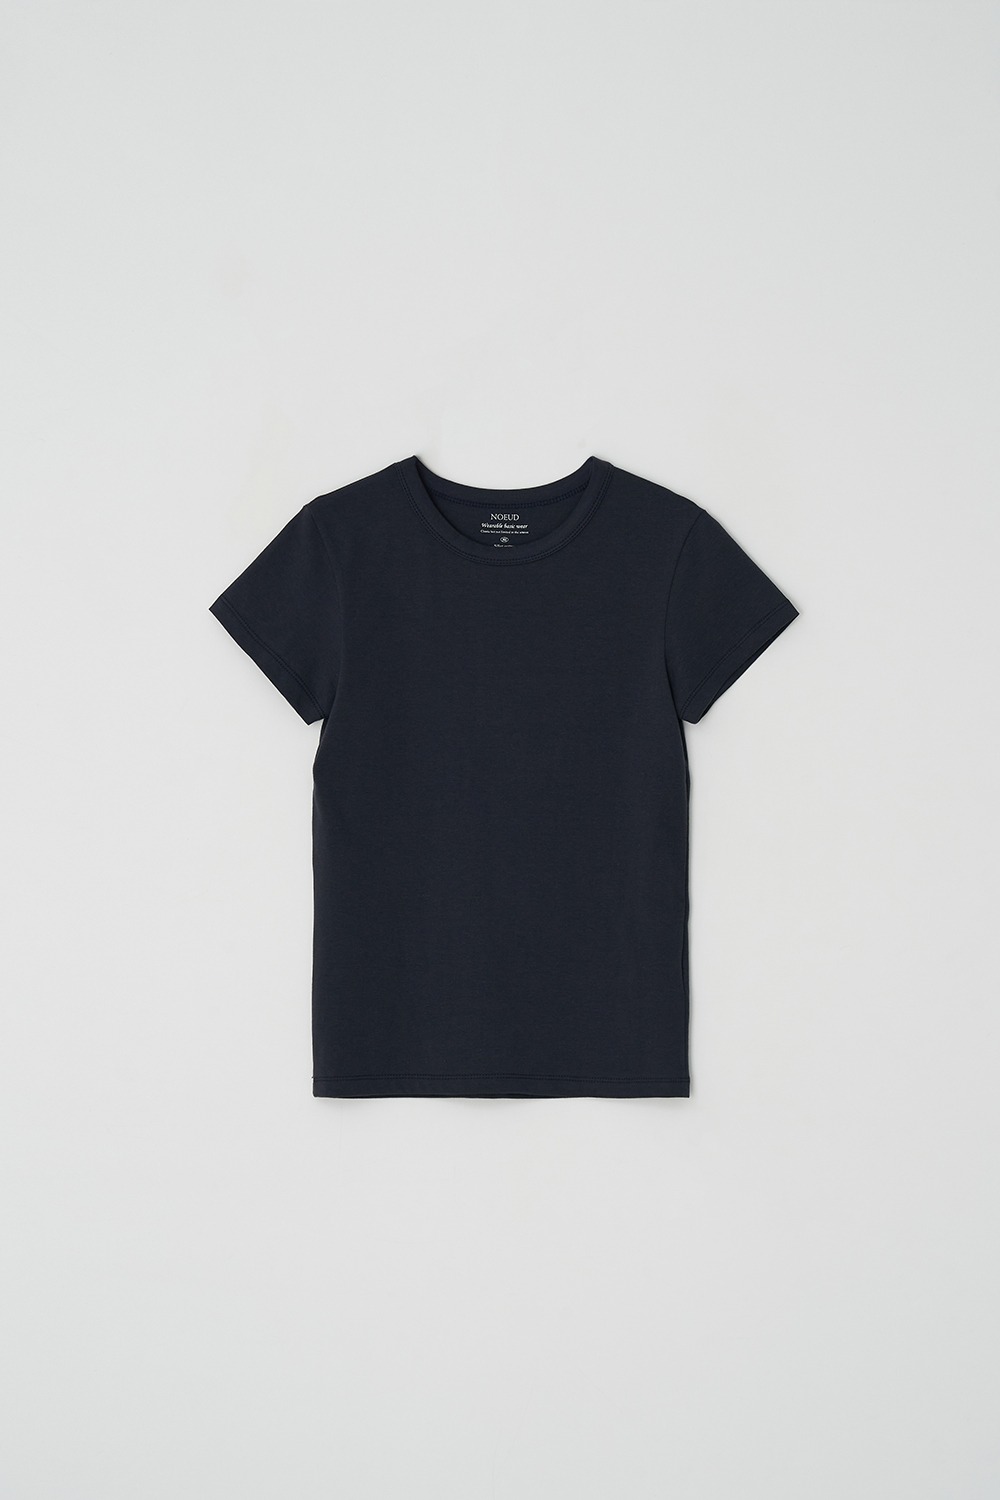 Round short sleeves (Charcoal)